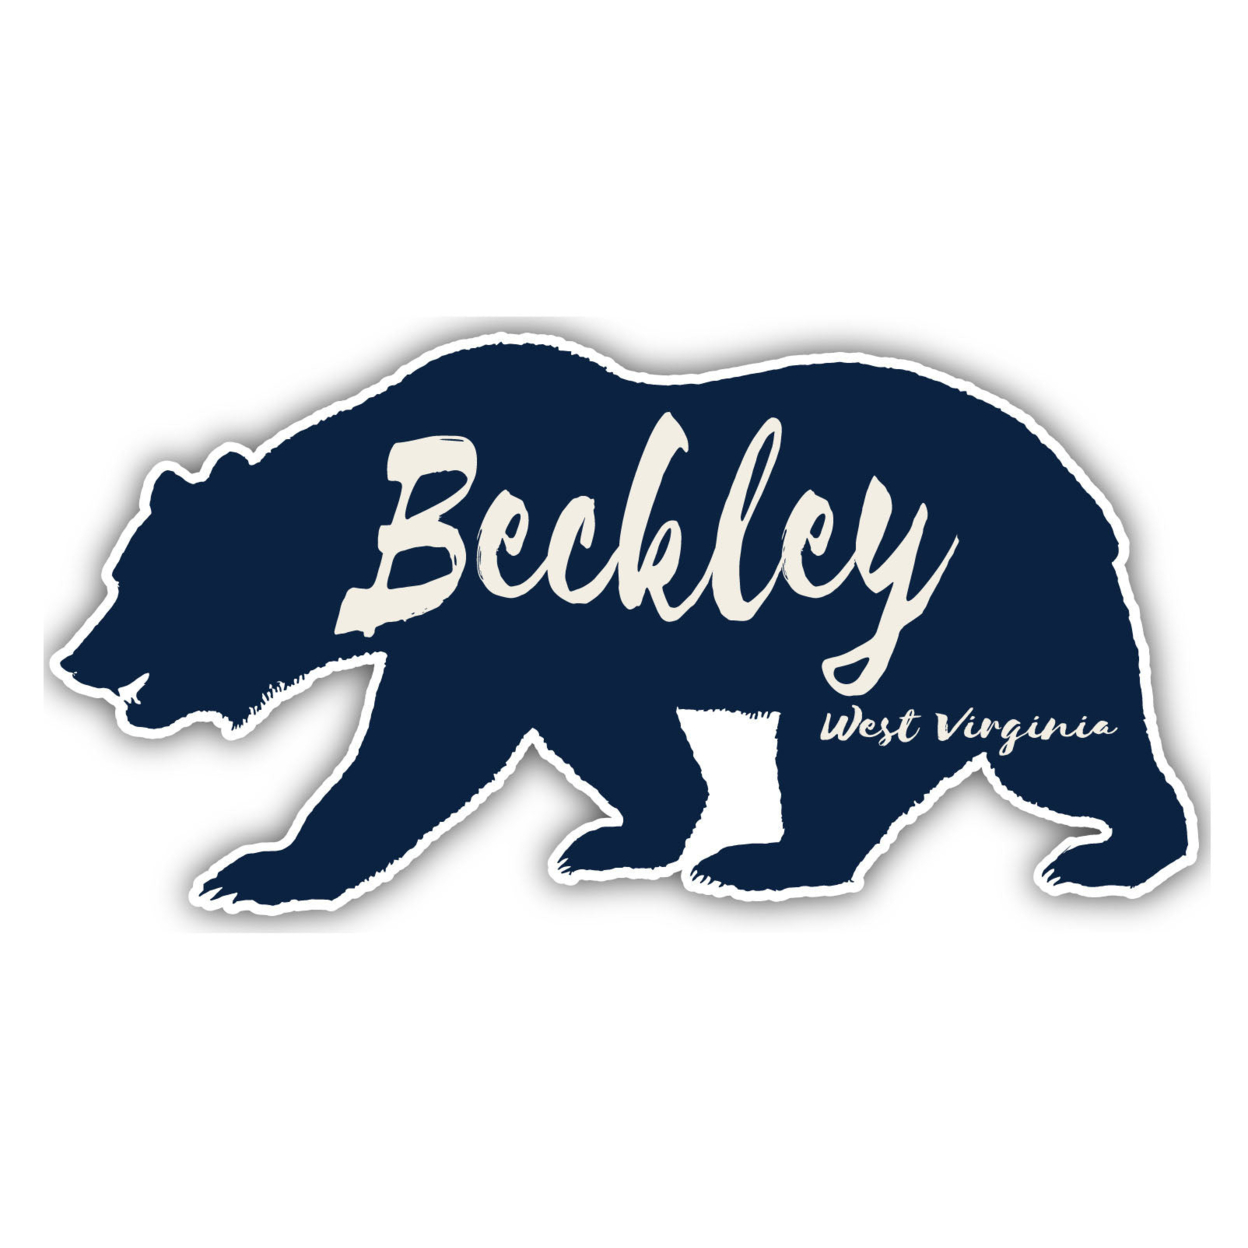 Beckley West Virginia Souvenir Decorative Stickers (Choose Theme And Size) - 4-Pack, 2-Inch, Bear